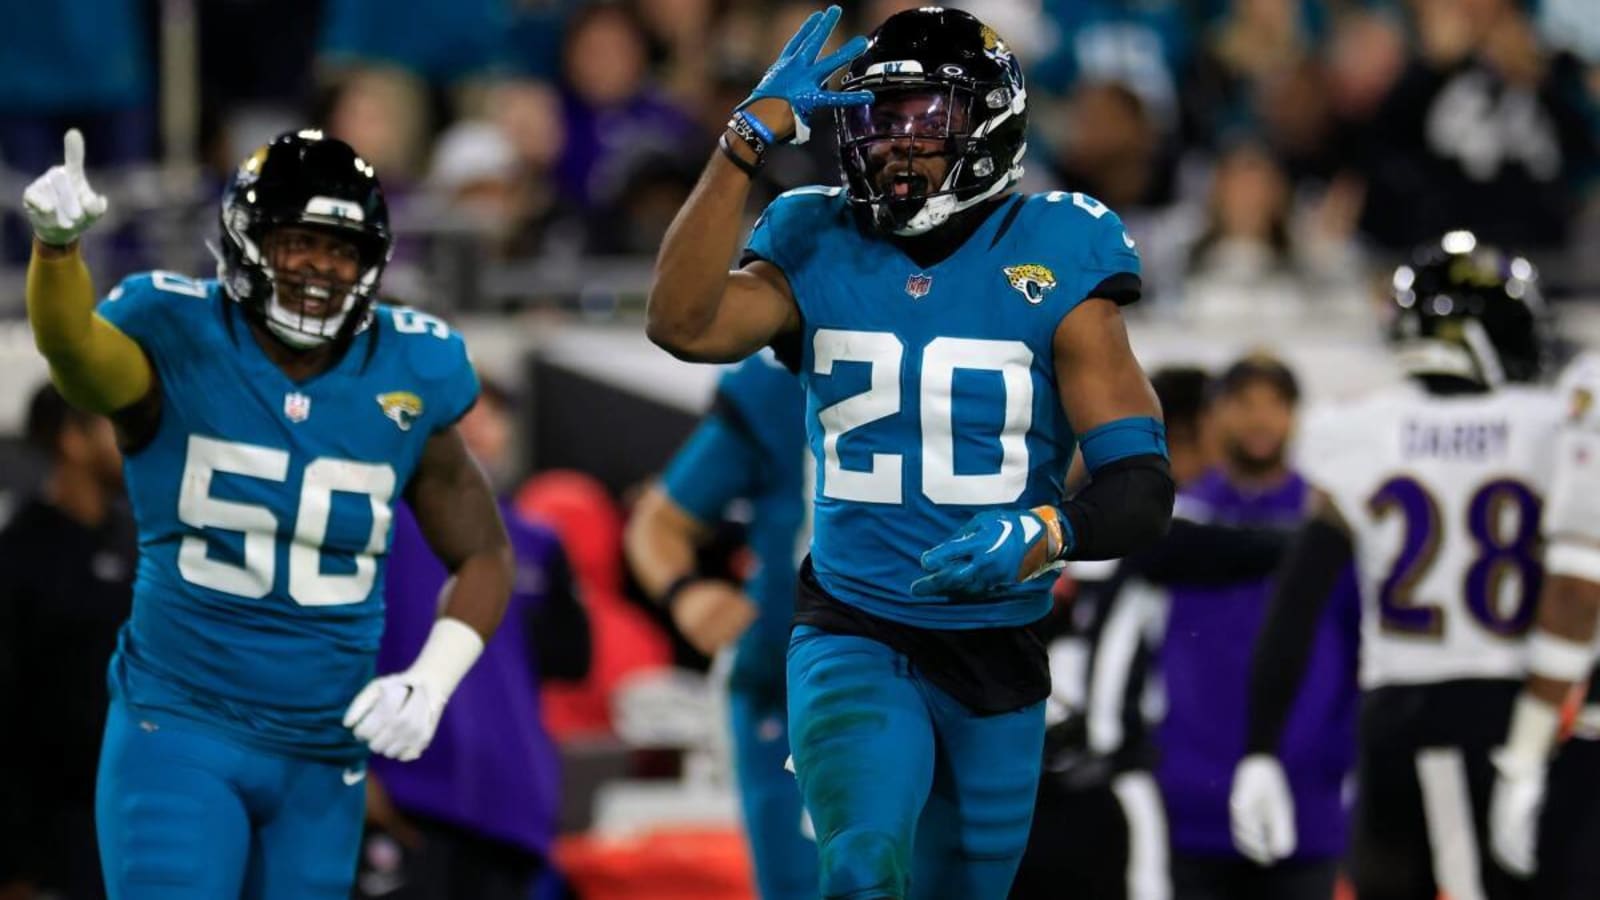 Jaguars Place Special Teams Standout Daniel Thomas on Injured Reserve